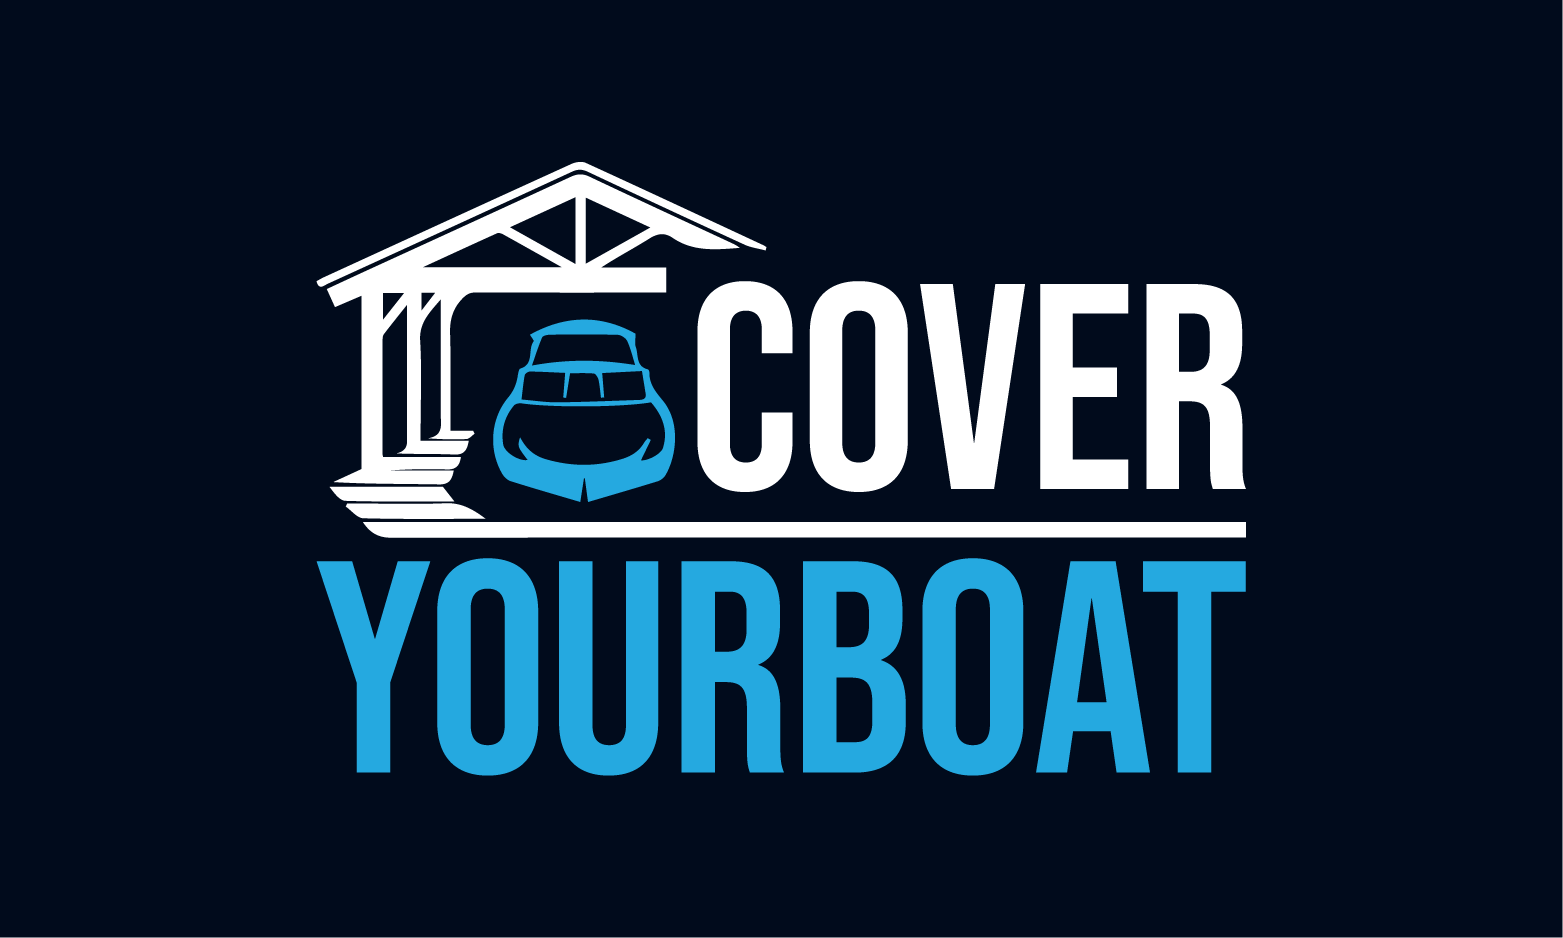 CoverYourBoat.com - Creative brandable domain for sale